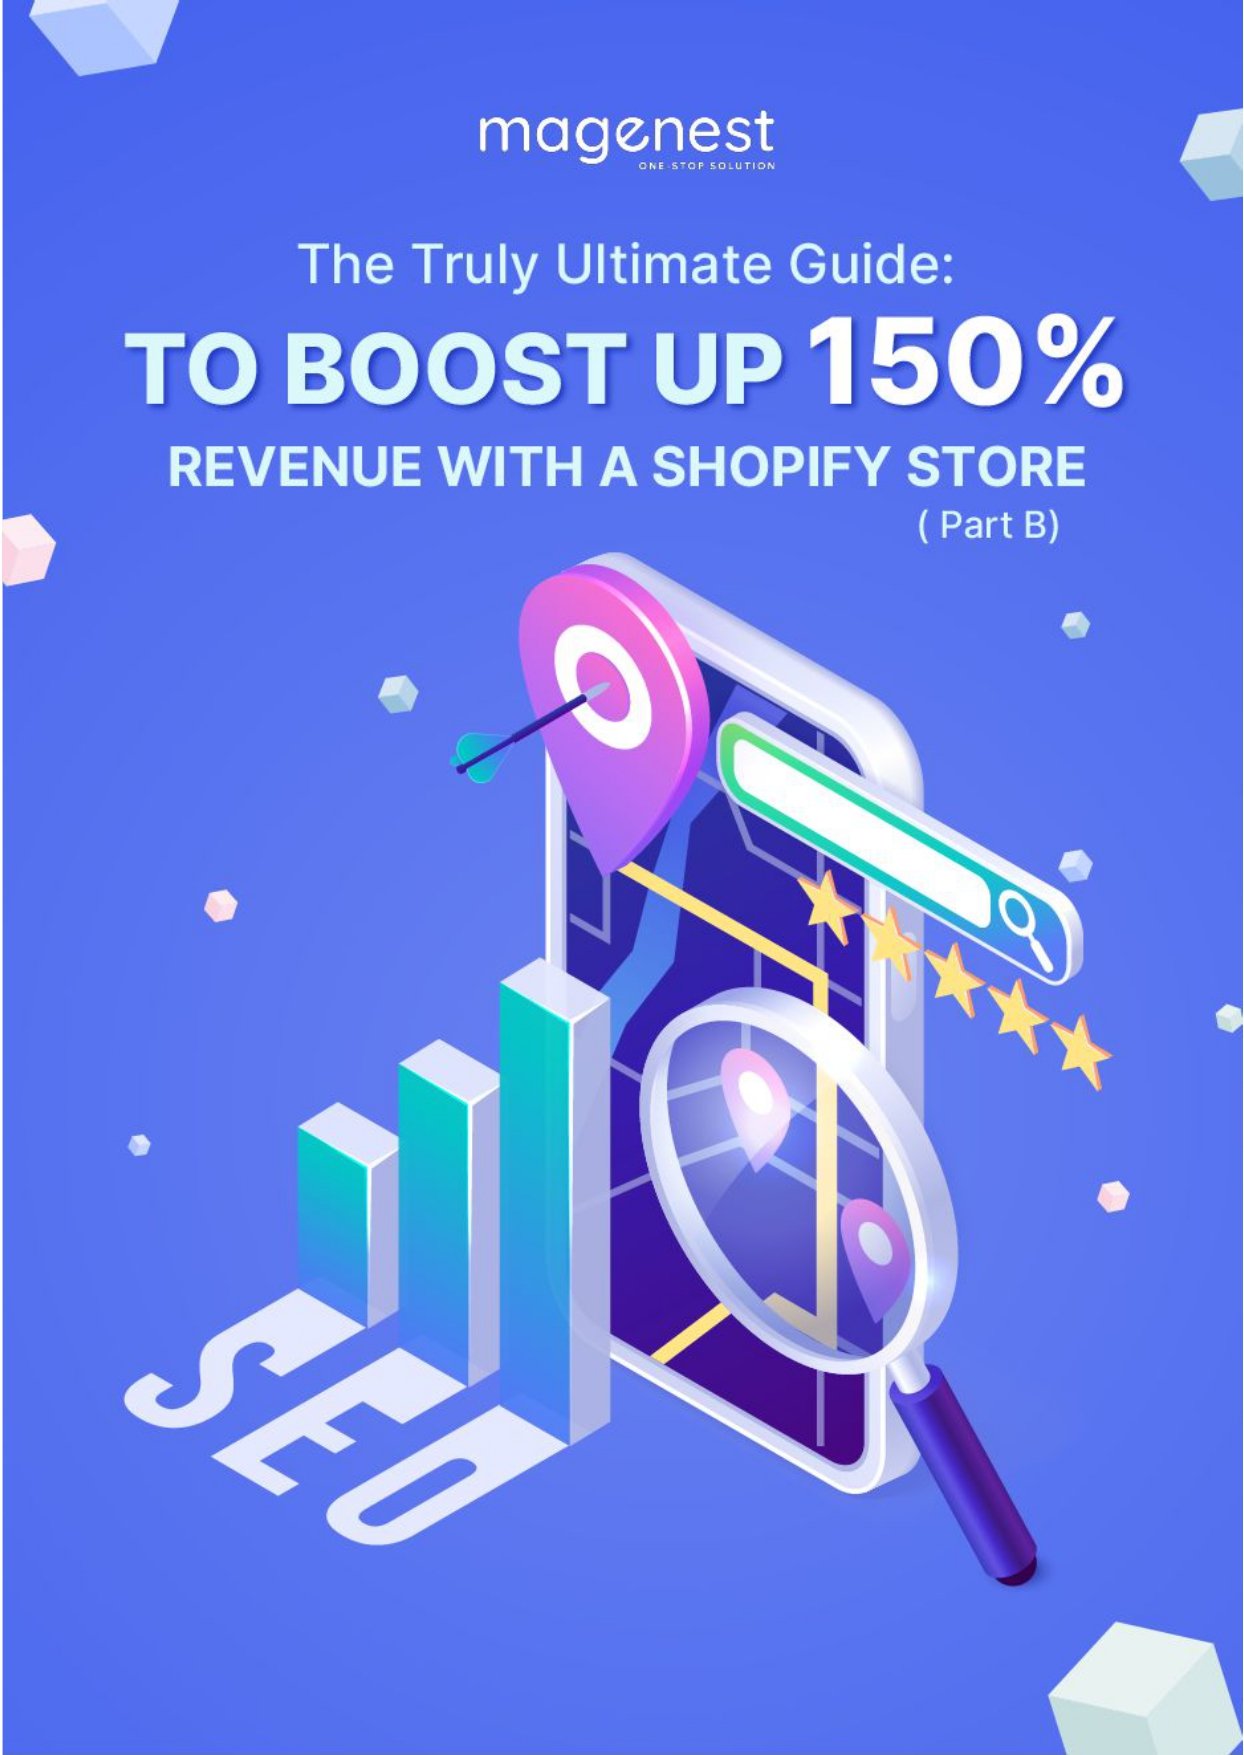 (Part B) eBook: The Truly Ultimate Guide: to Boost Up 150% Revenue with a Shopify Store0